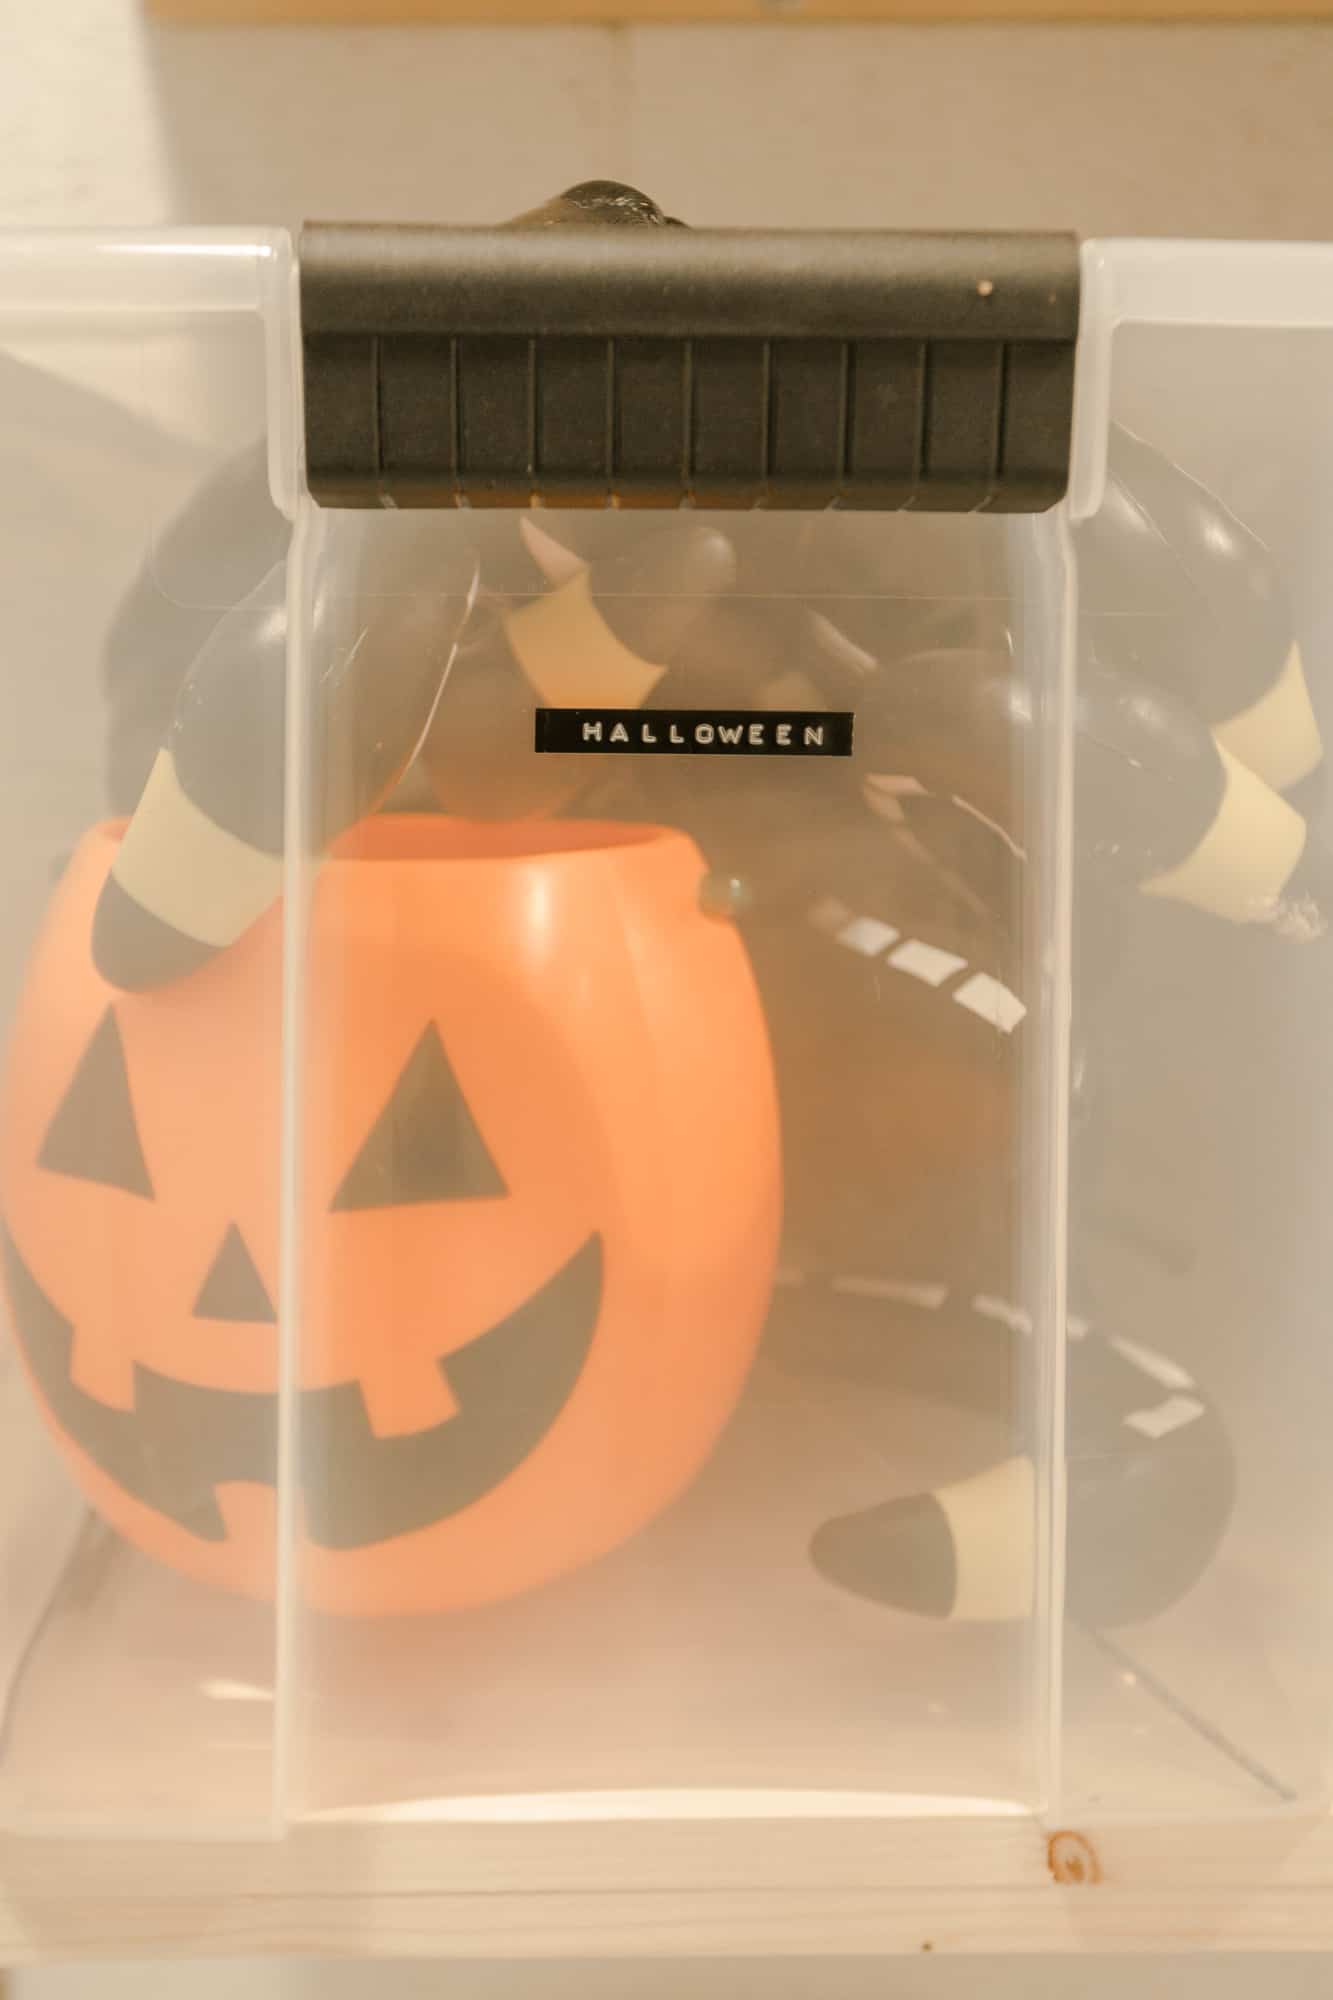 clear bin with a black label that says halloween